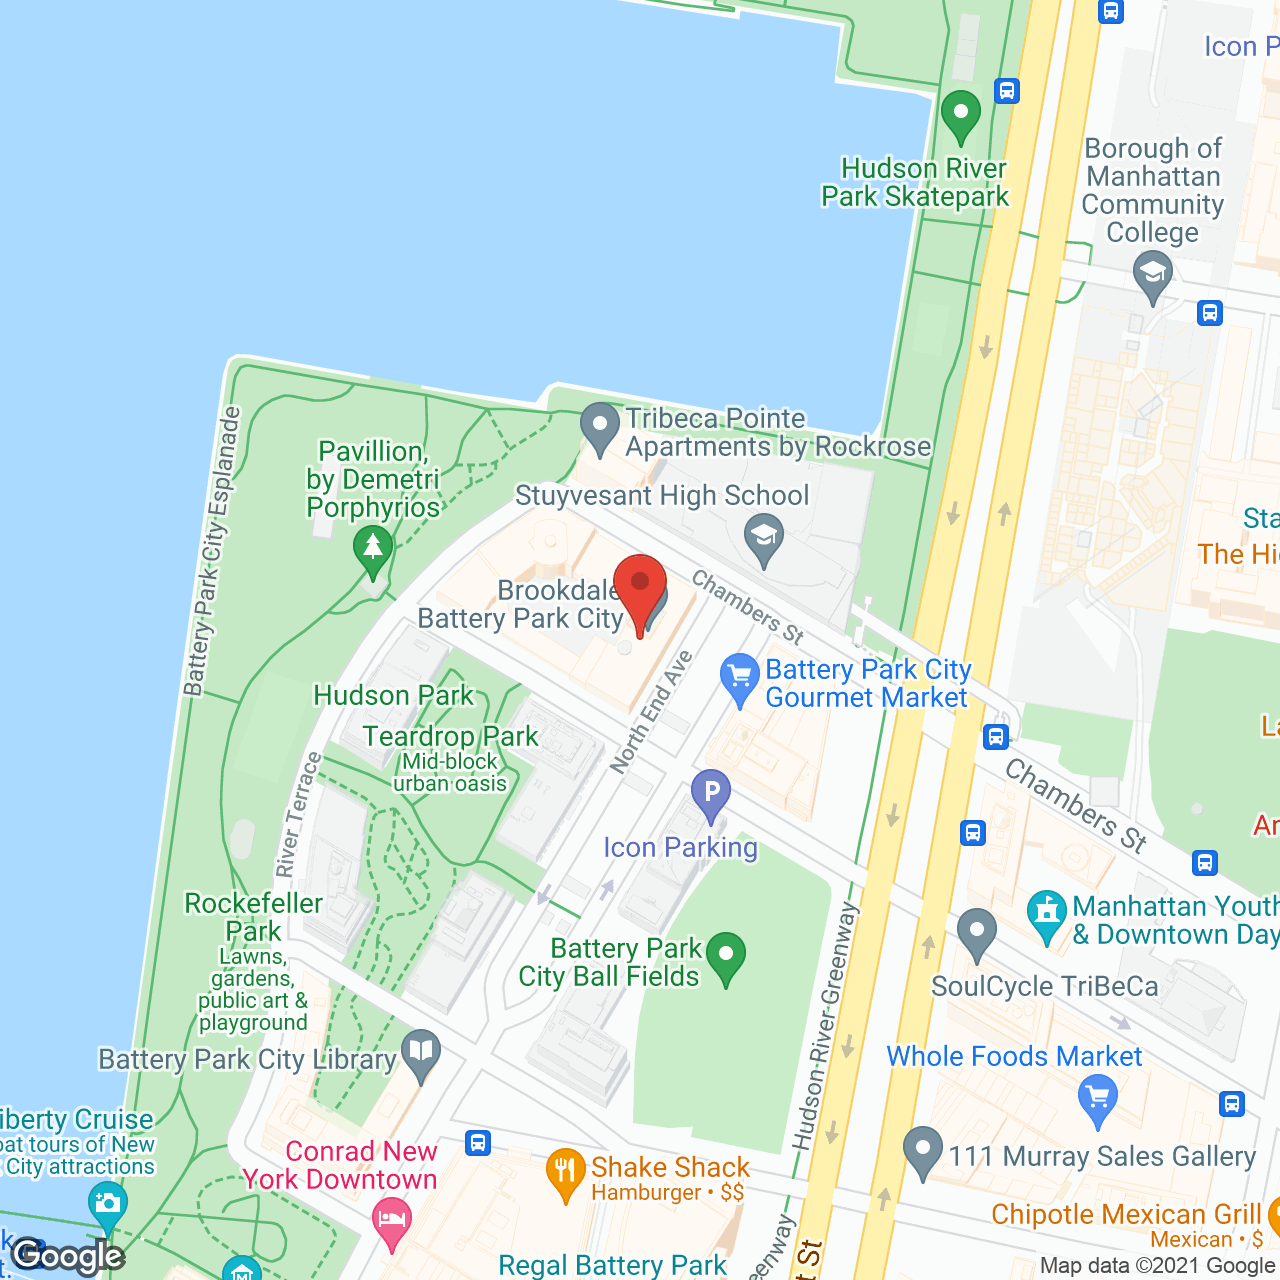 Brookdale Battery Park City in google map